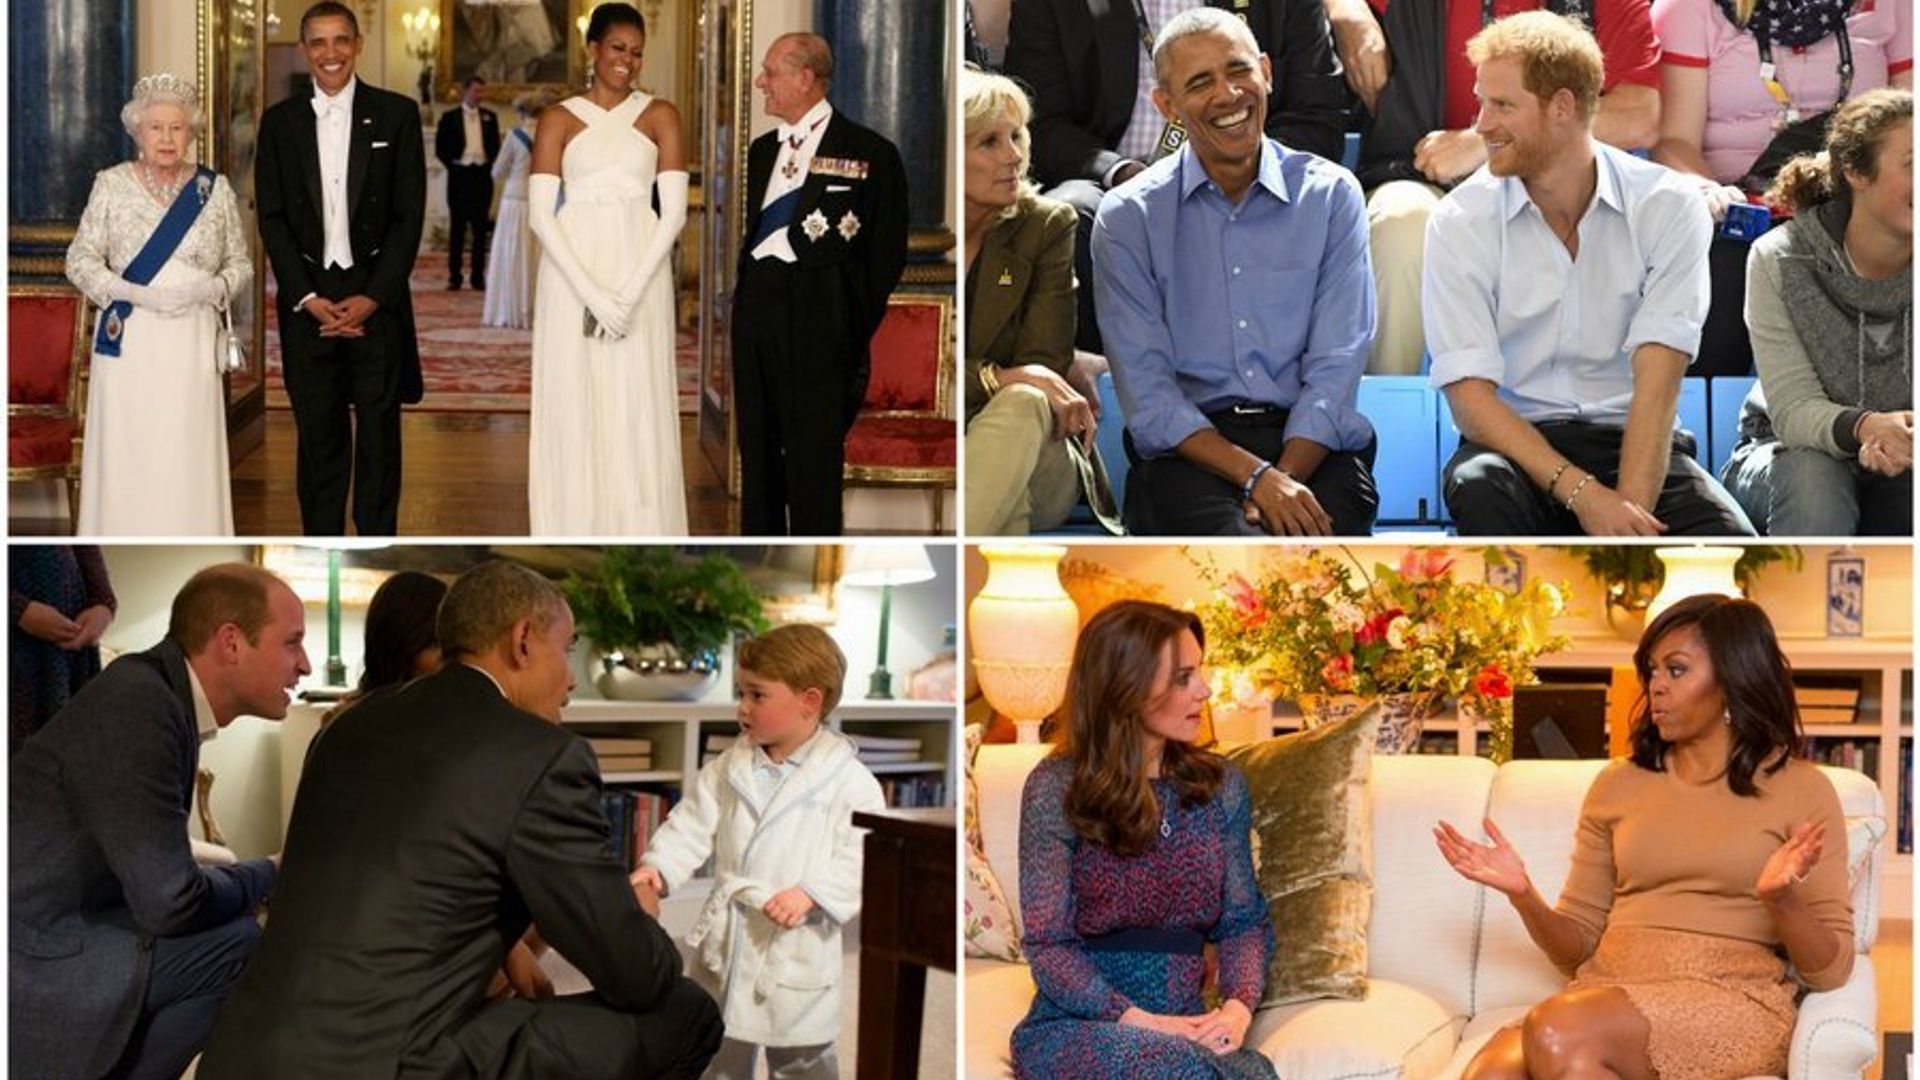 The British royals and the Obamas: A photo timeline of their moments together